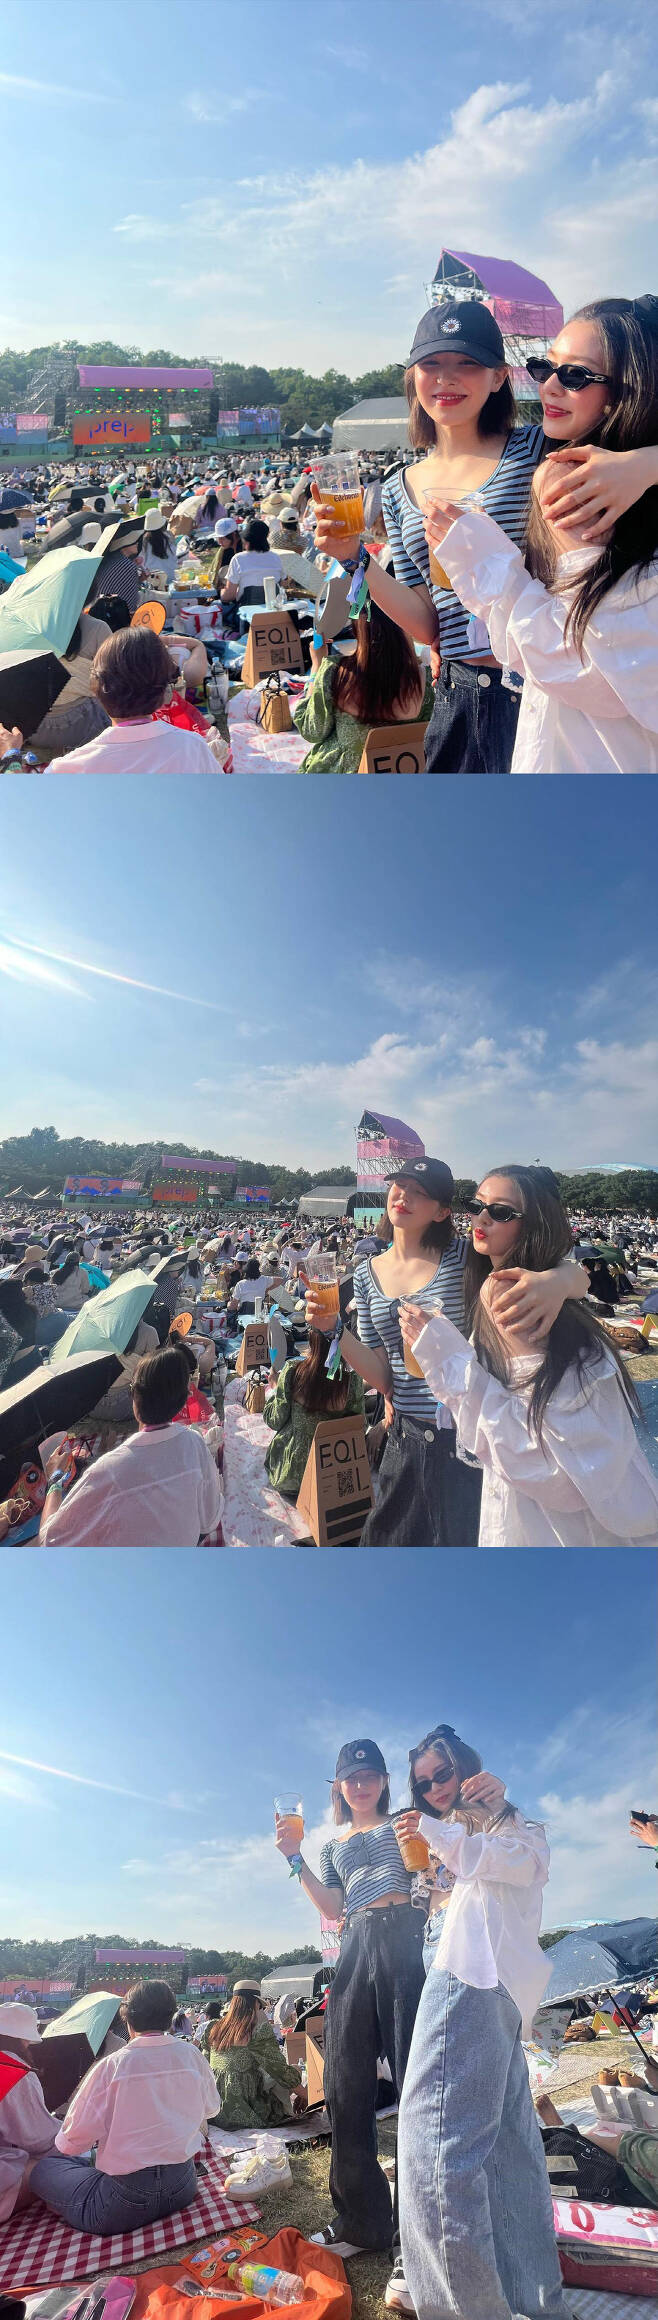 Girls group RED Velvet member Wendy enjoyed the Seoul Jazz Festival with Irene.Wendy released some photos on her 29th day, posting Lovers and Mommy on her instagram.In the photo, Wendy is enjoying music with Wendy at the Seoul Jazz Festival 2022 held at the Olympic Park 88 lawn yard.